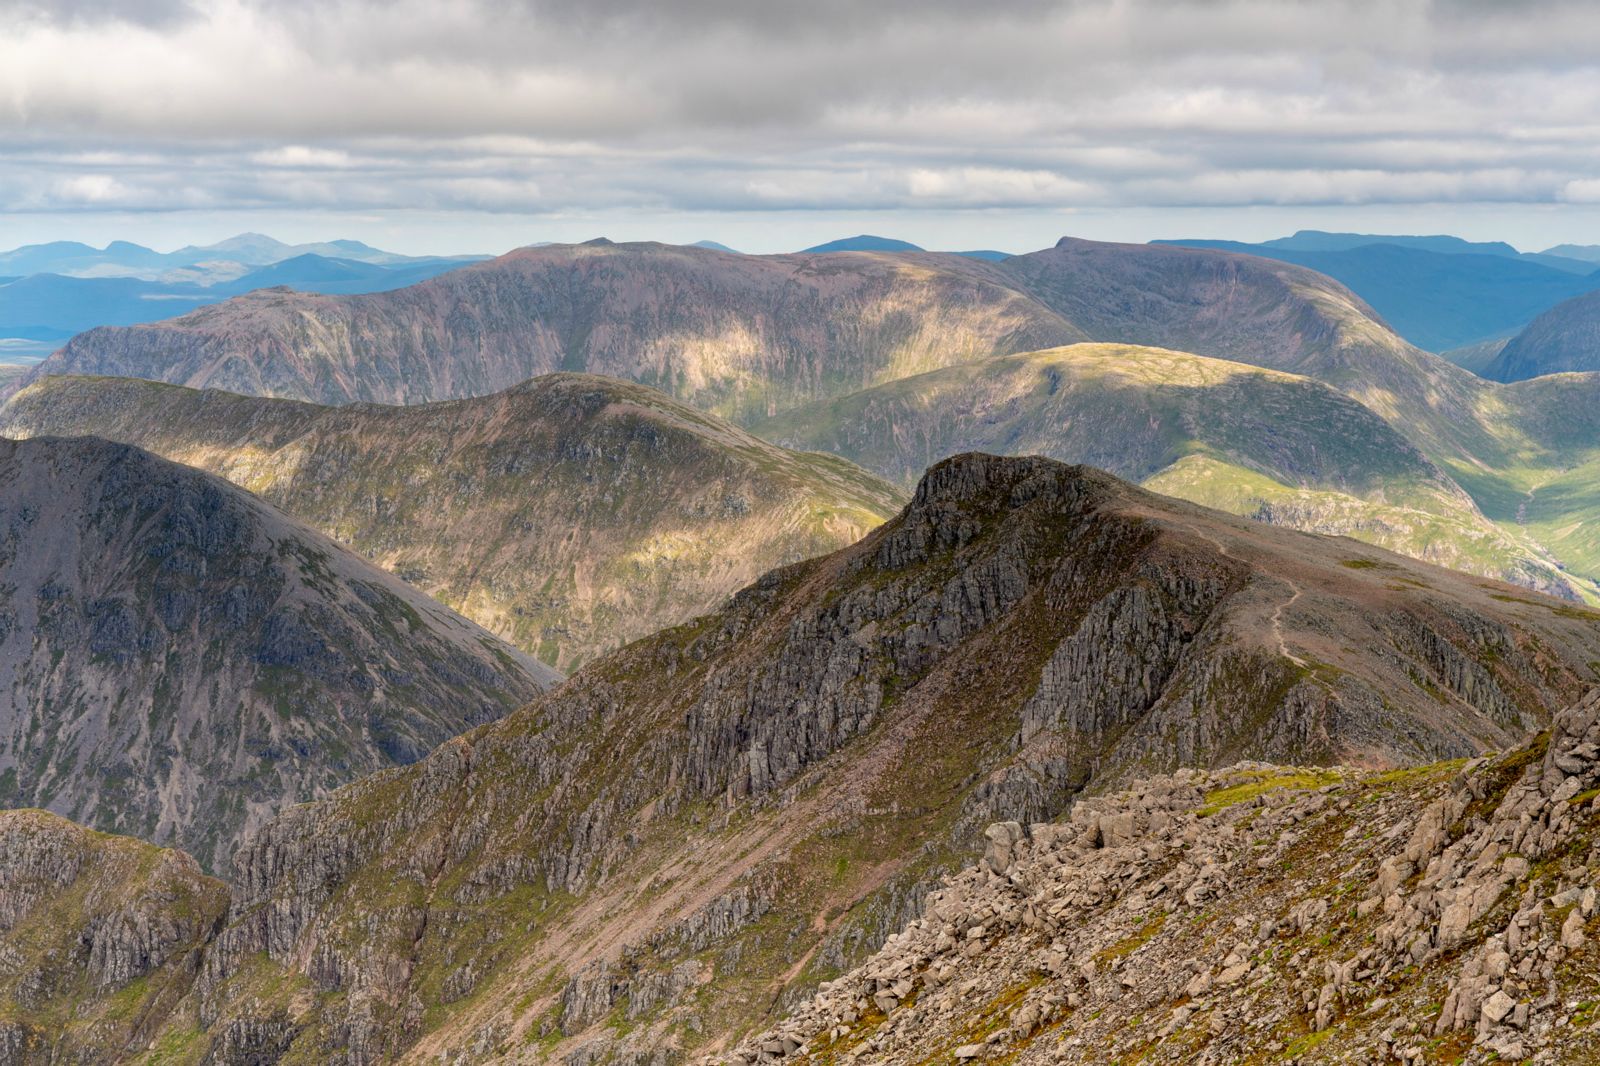 View of Stob Coire Sgreamhach (1077m) from Bidean nam Bian (1141m), with Creise and Meall a' Choire in the distance.